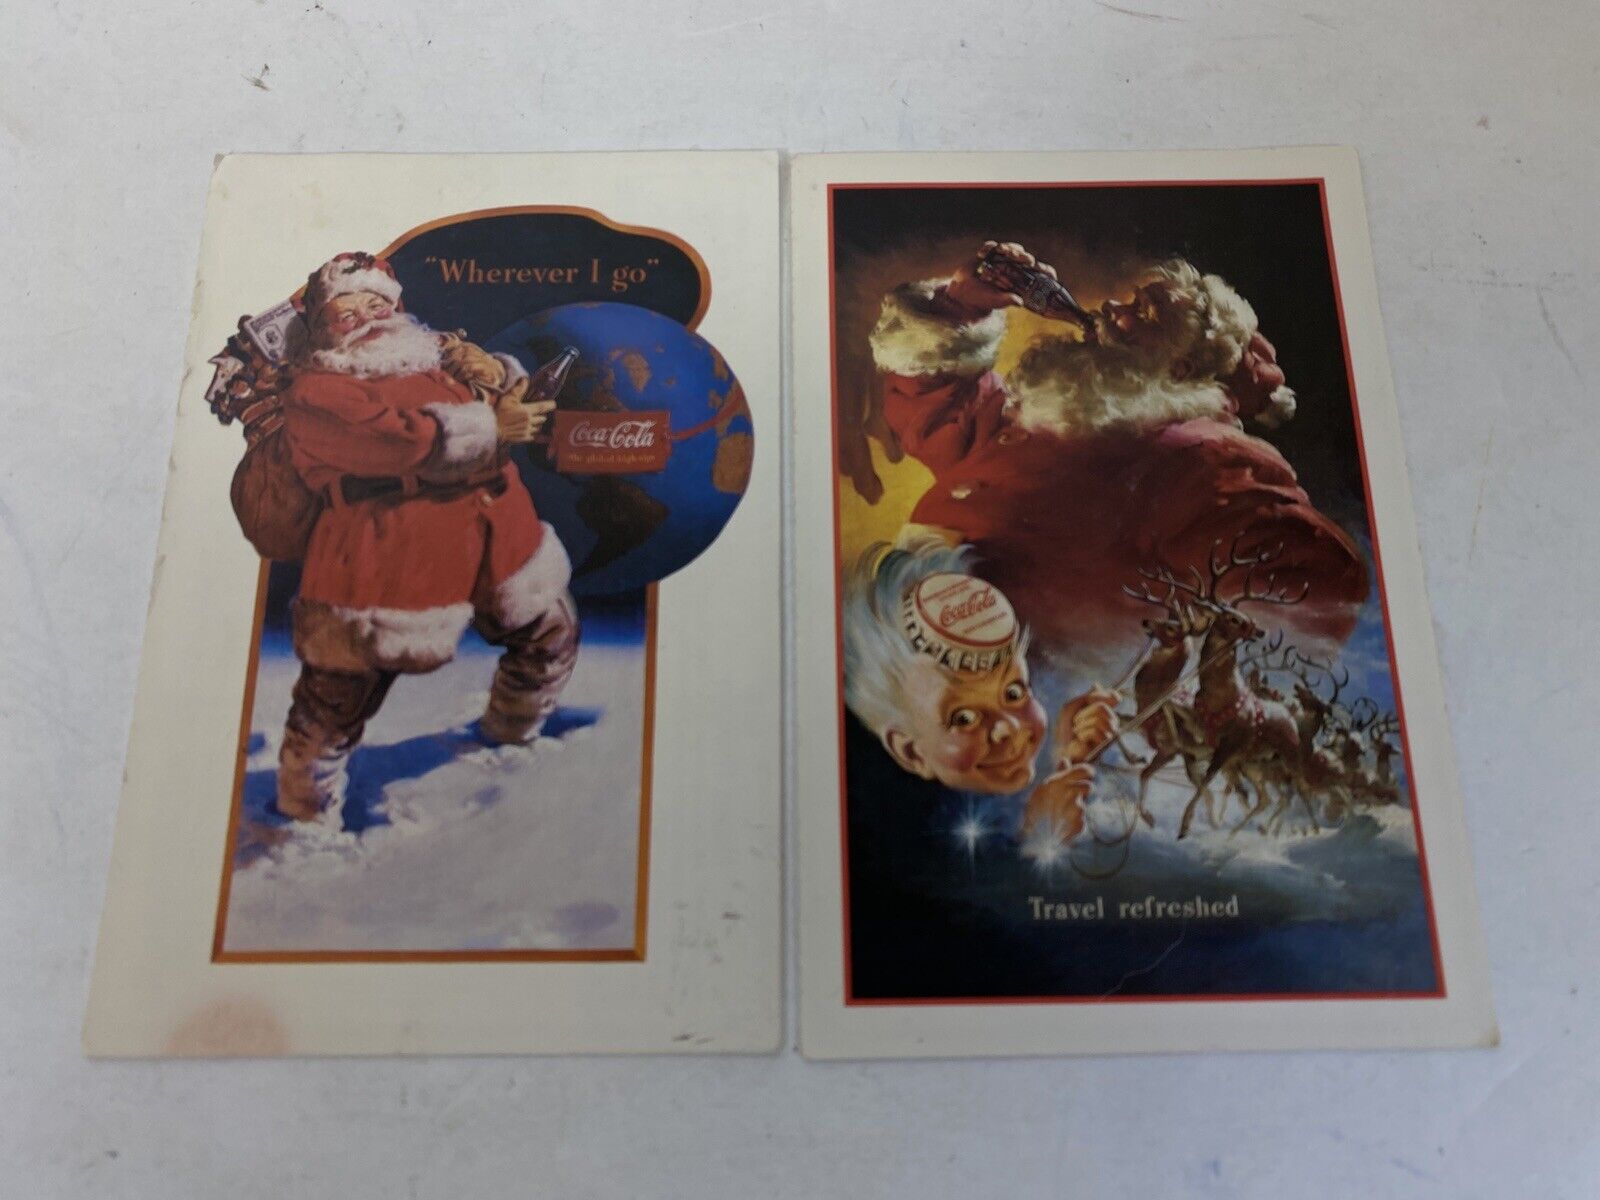 Cocal Cola Vintage Kmart postcards coupons 1992 lot of 2 ww